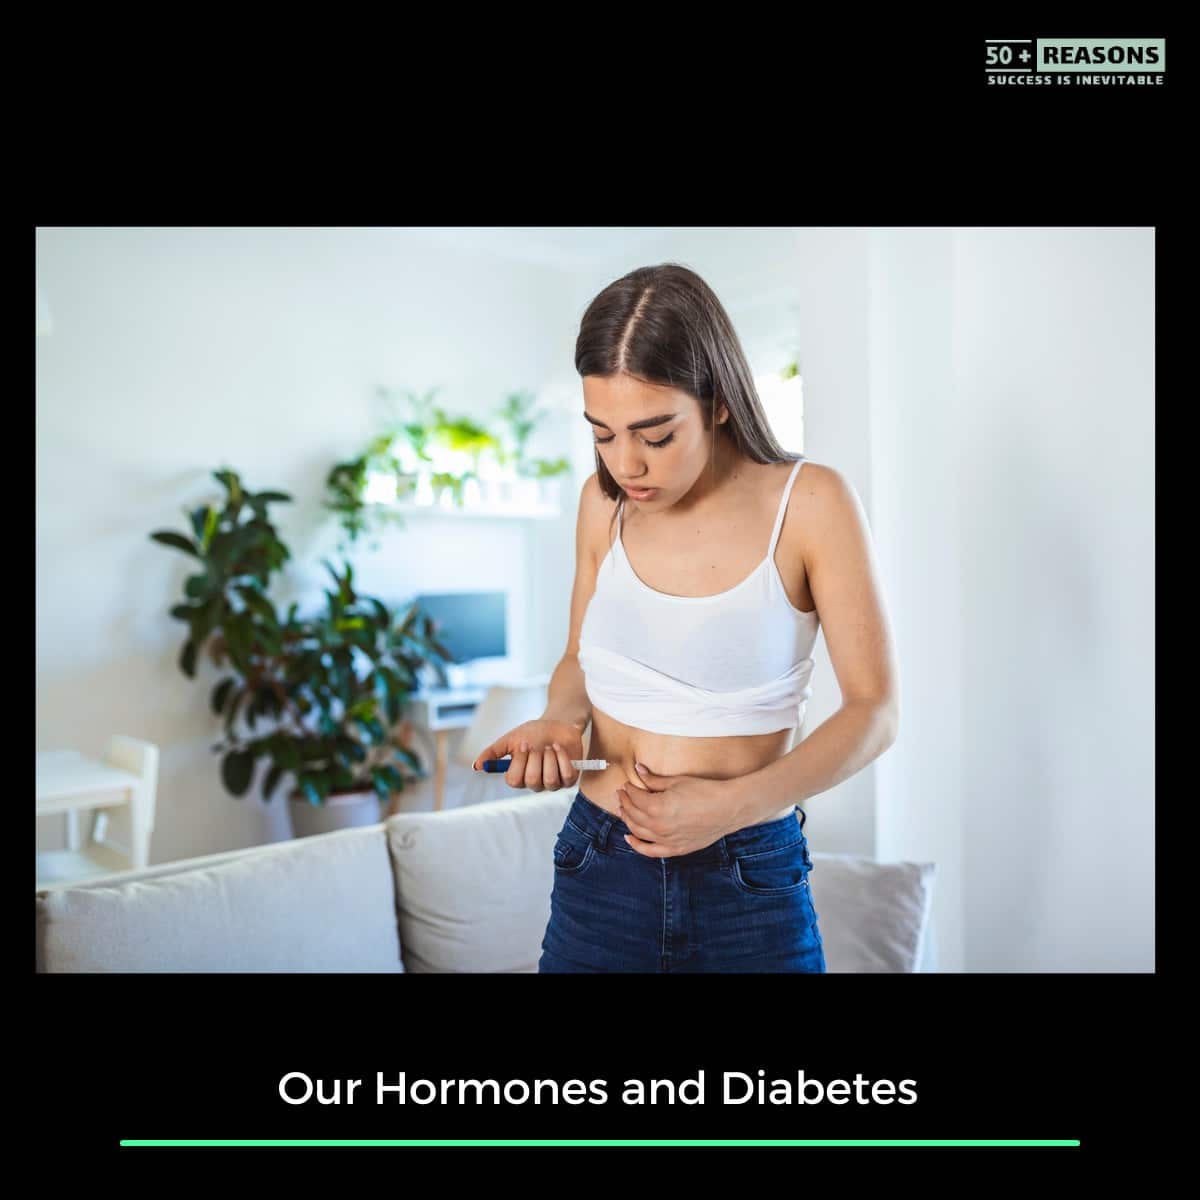 Our Hormones and Diabetes